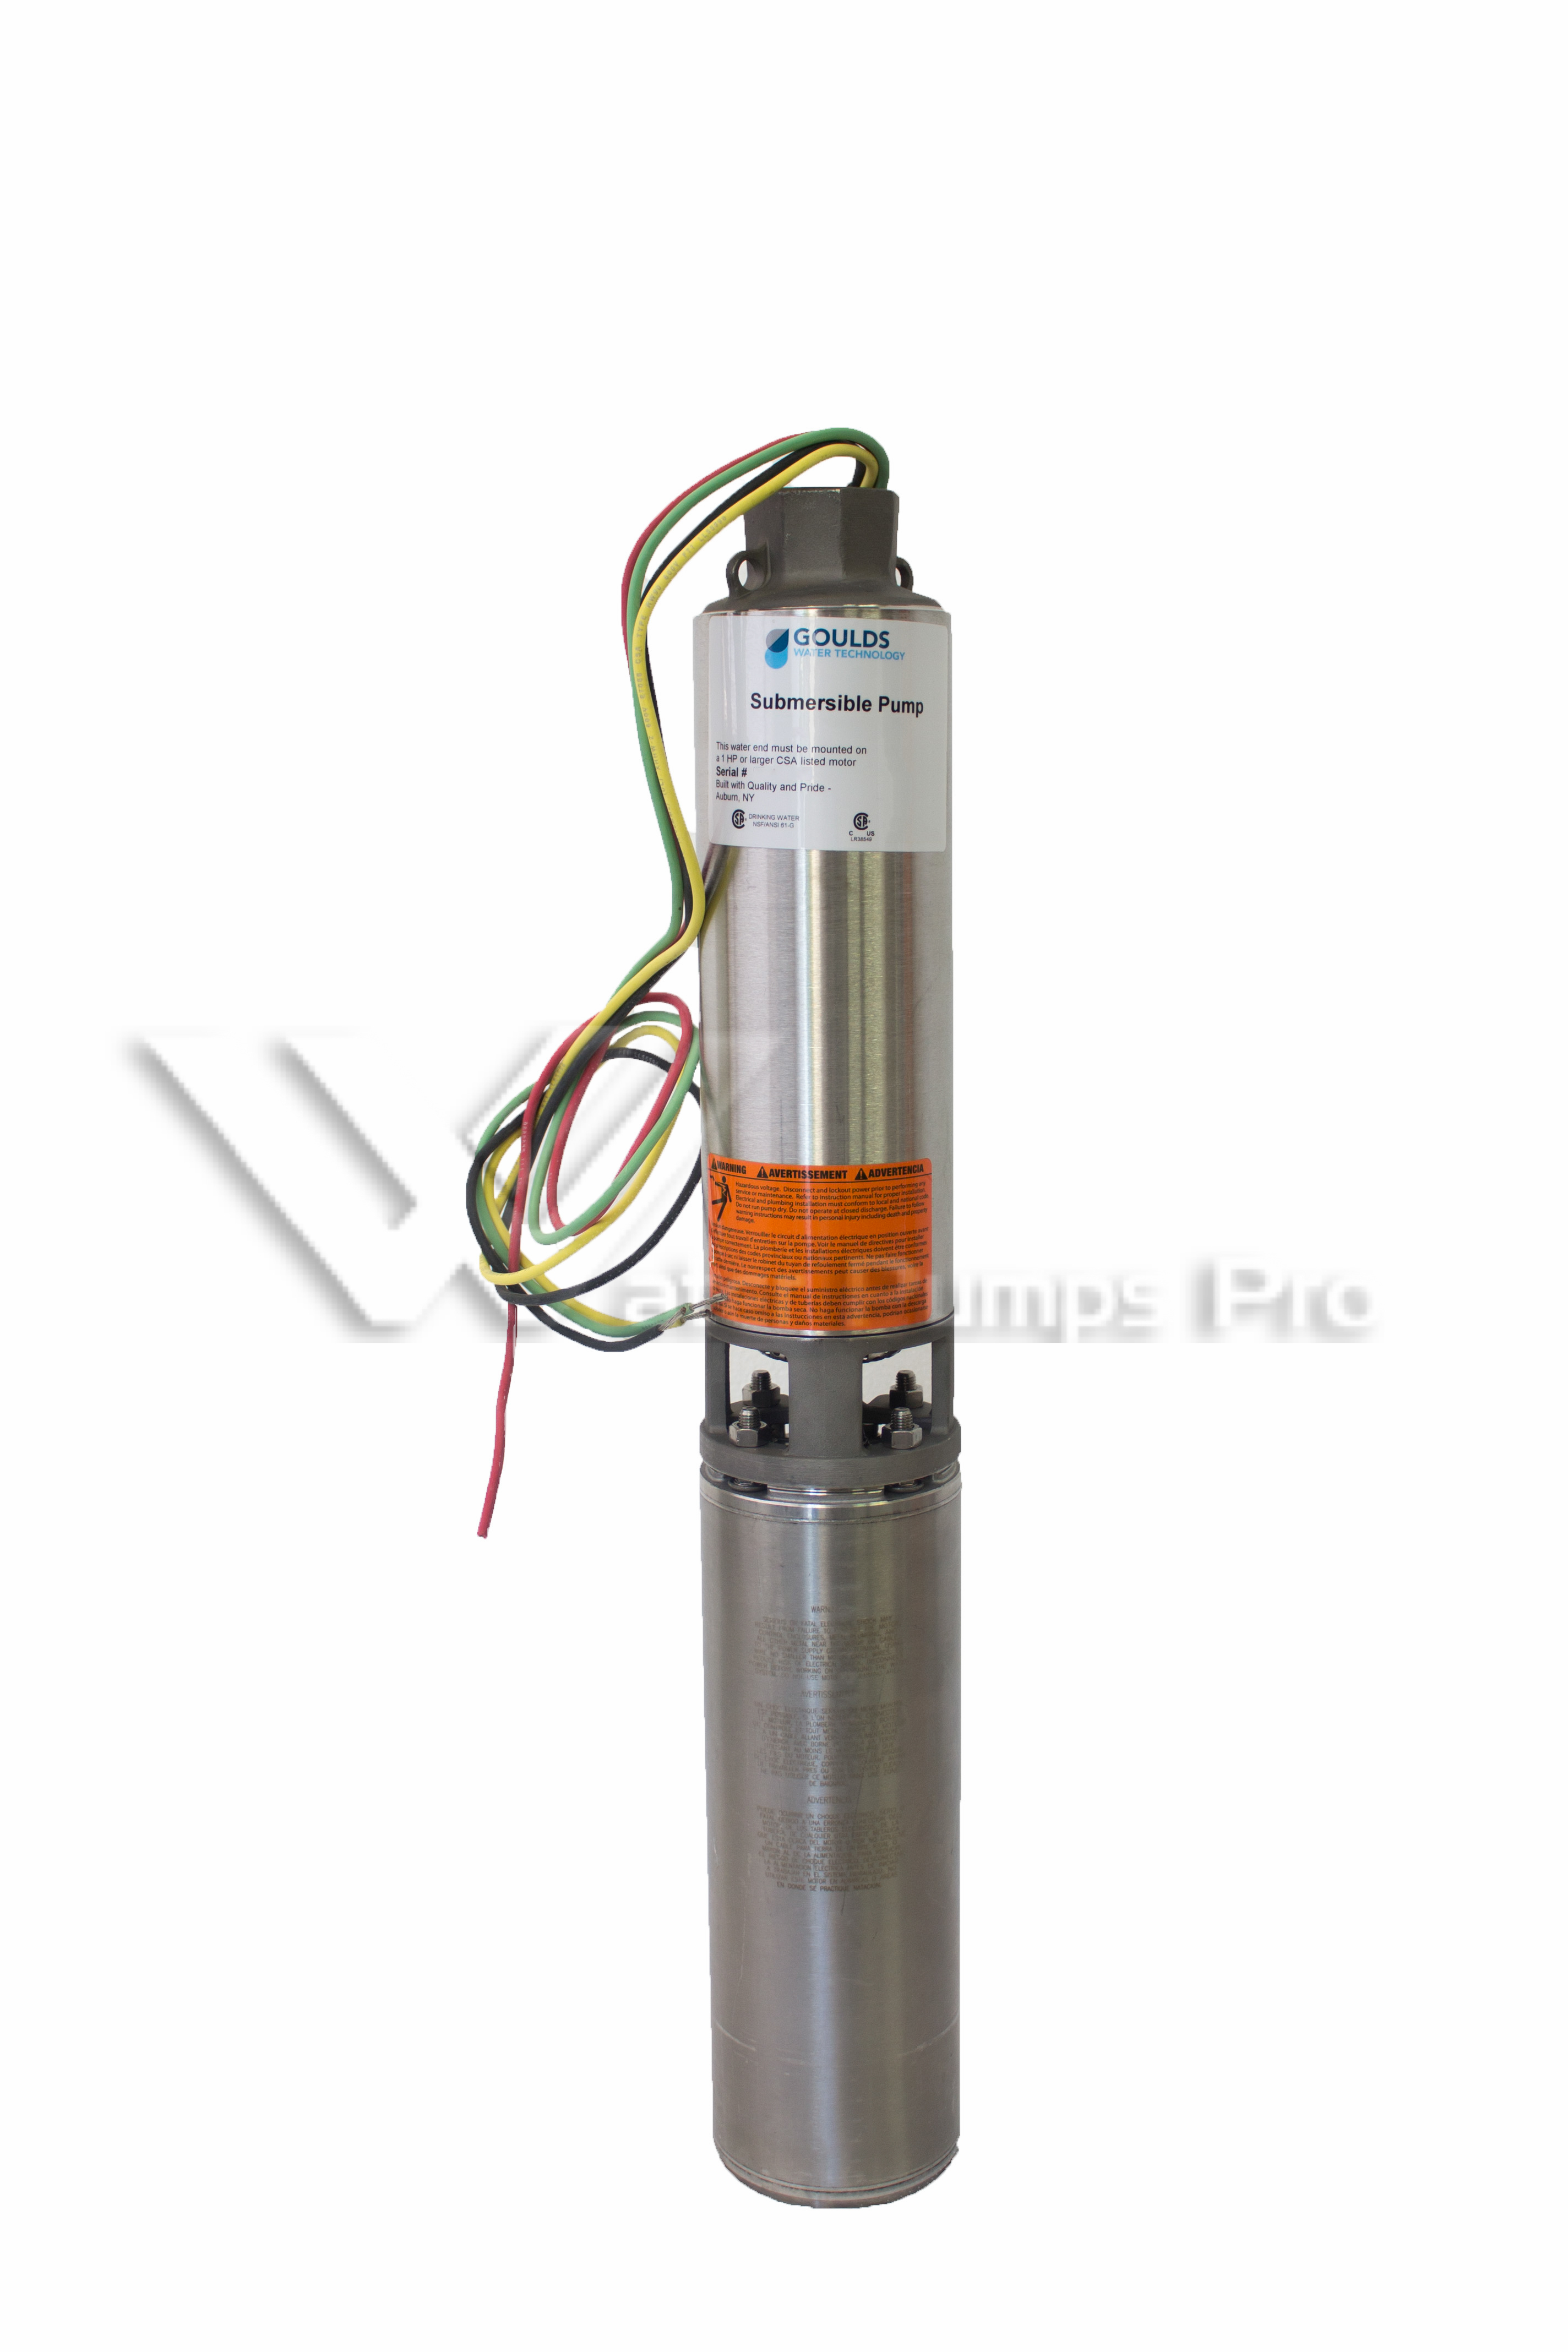 Goulds 10GS15412CL 10GPM 1.5HP 230V 3 Wire Submersible Well Pump